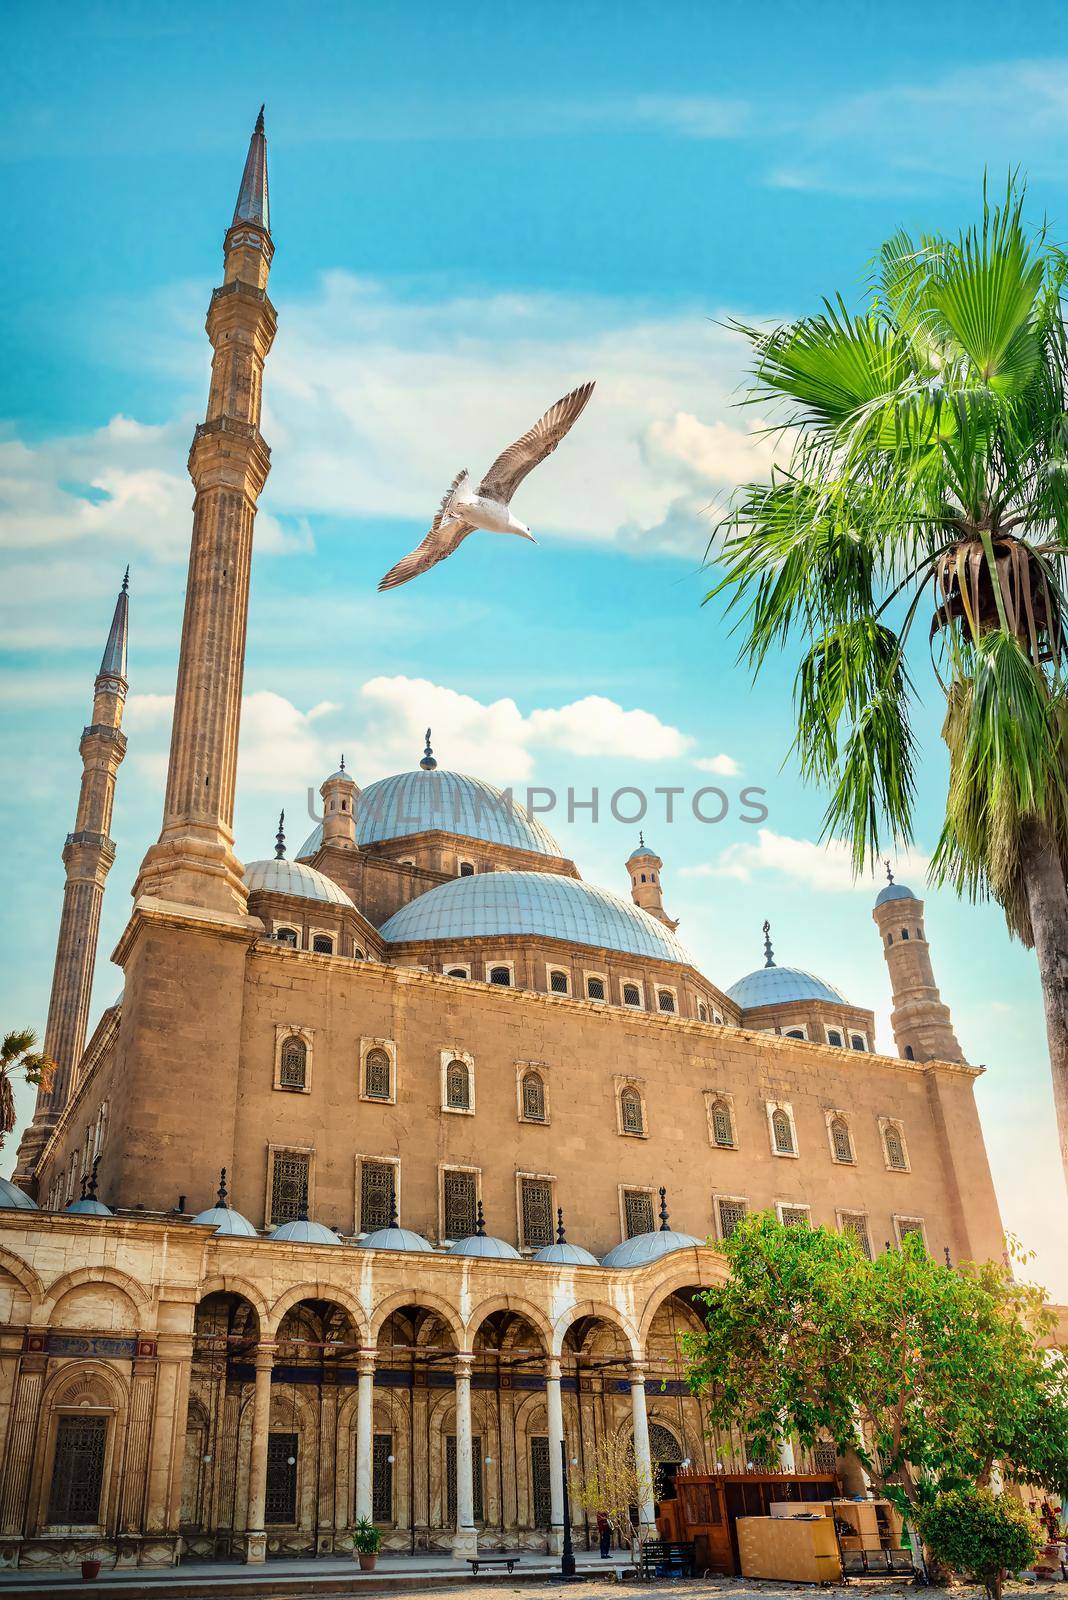 The great Mosque of Muhammad Ali Pasha in Cairo Egypt